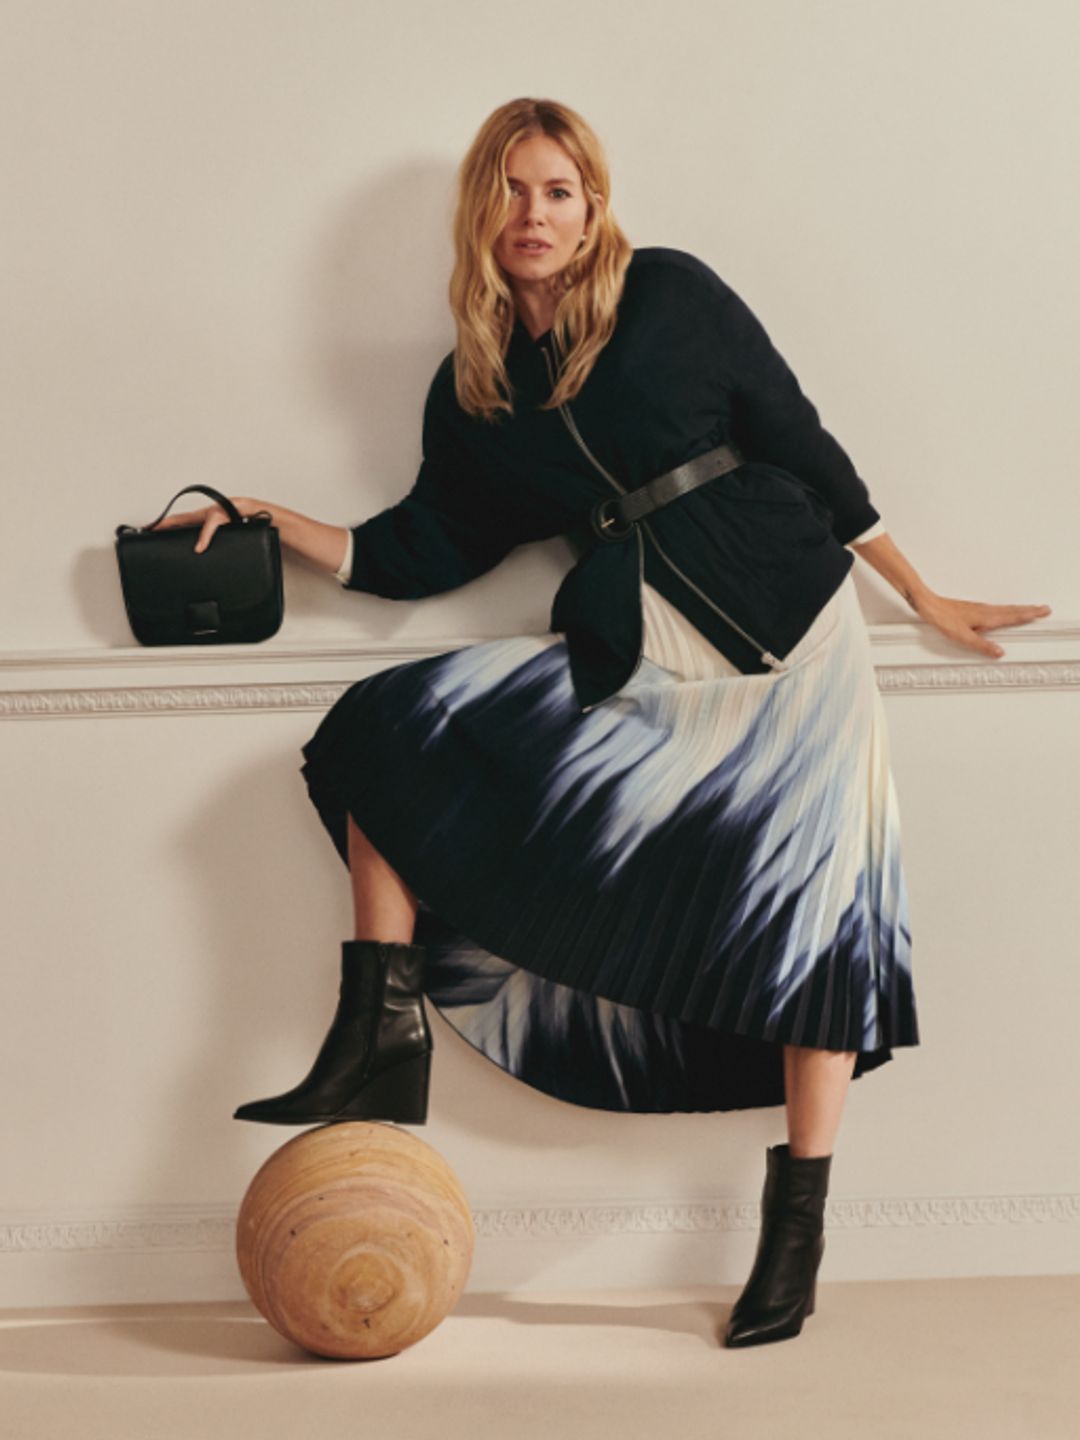 Sienna Miller is the new face of M&S' 'Anything But Ordinary' campaign 